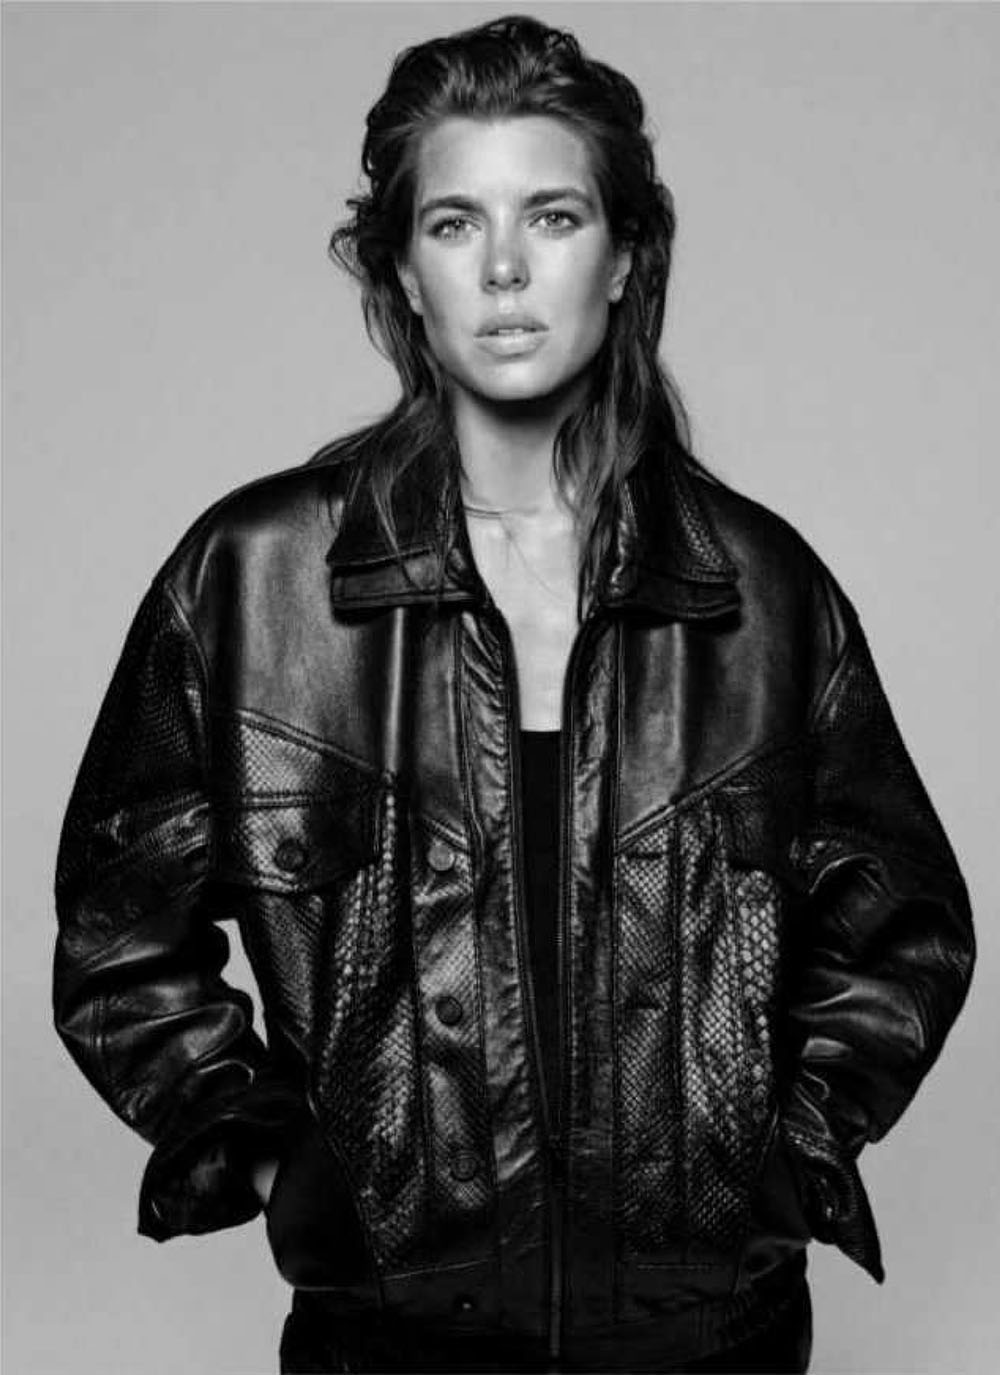 Charlotte Casiraghi covers Vogue Germany September 2018 by Daniel Jackson